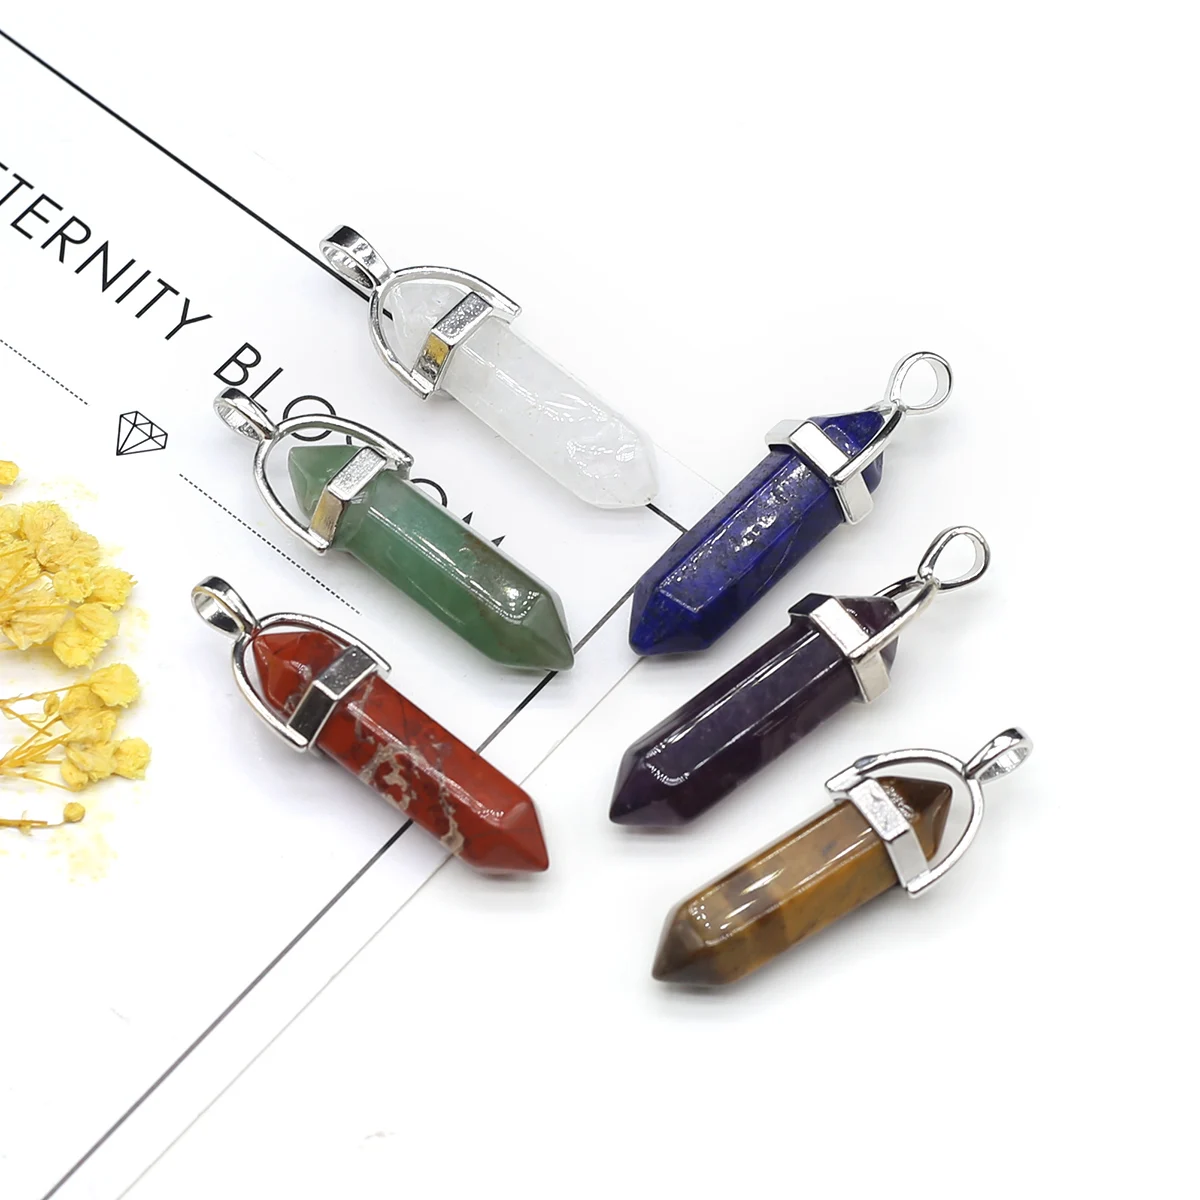 

Natural Stone Pendant Quartz Agate Aventurine Amethyst Tiger Eye Healing Crystal Charms for Jewelry Making DIY Necklaces 6PC